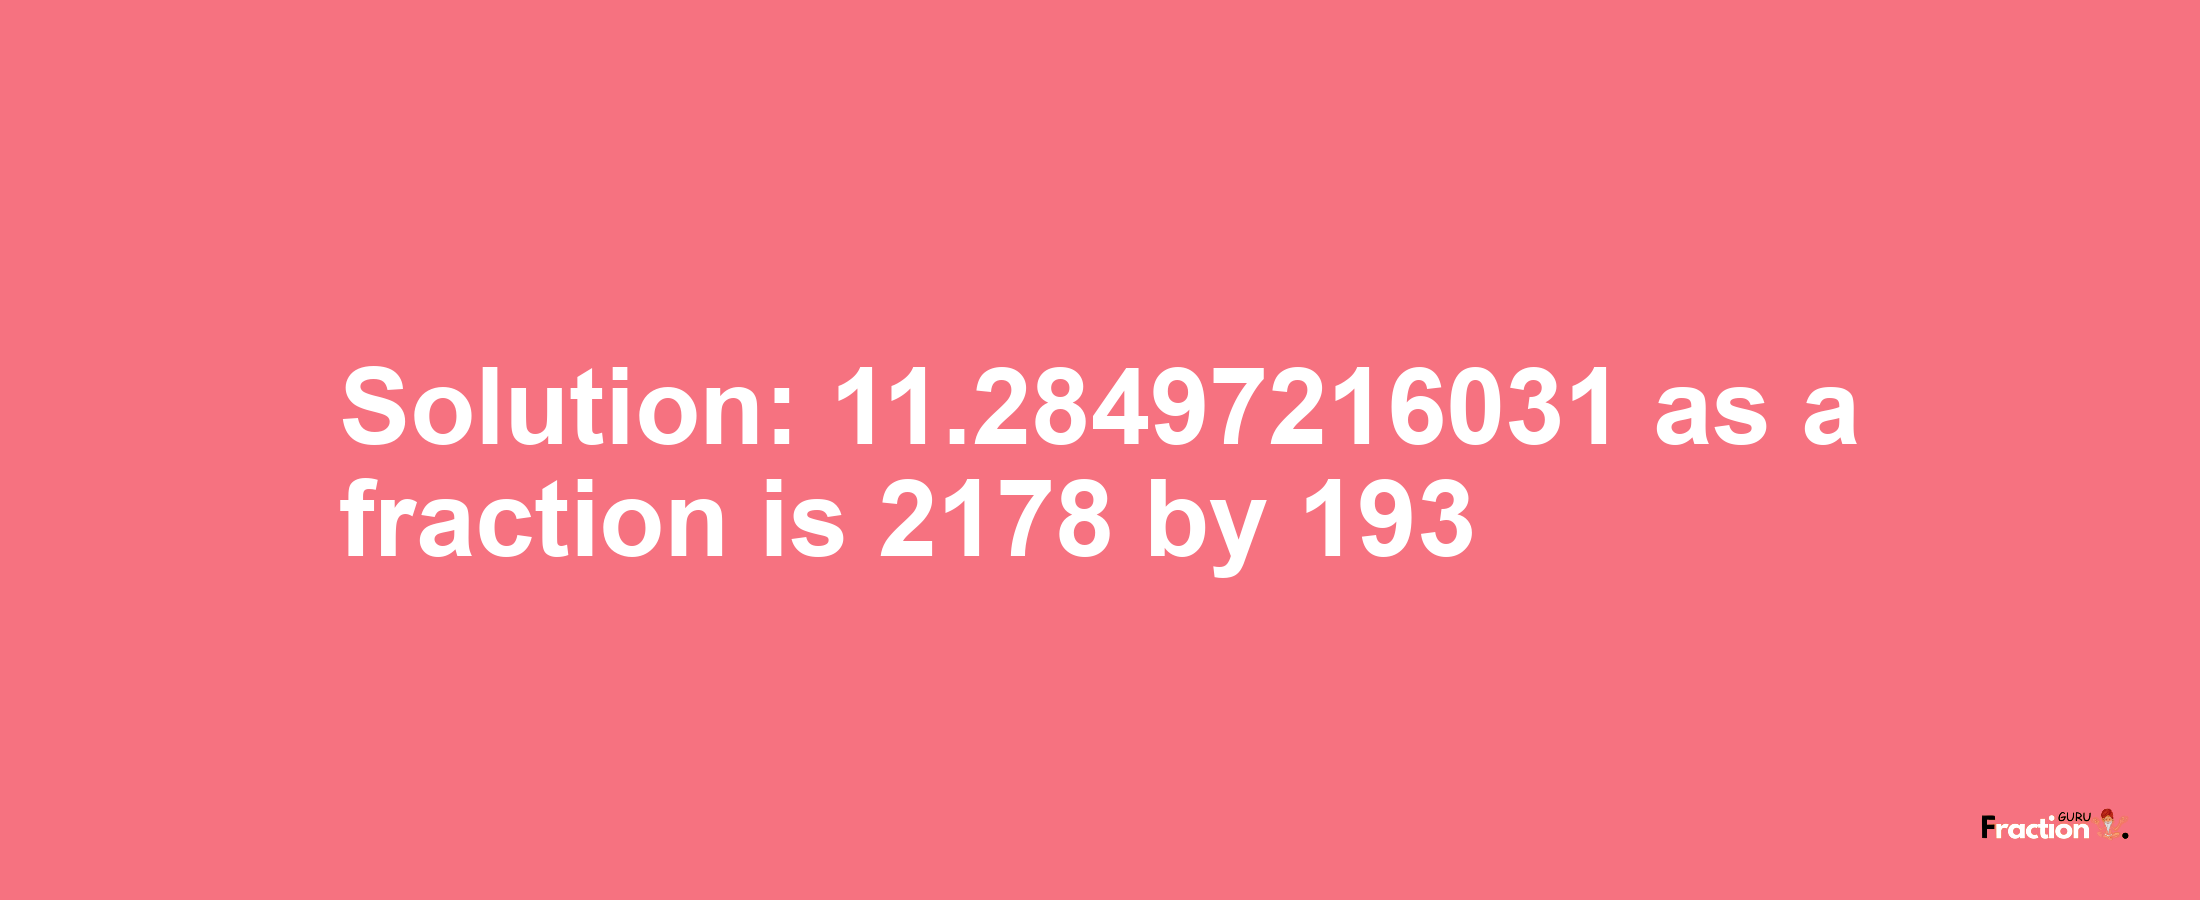 Solution:11.28497216031 as a fraction is 2178/193